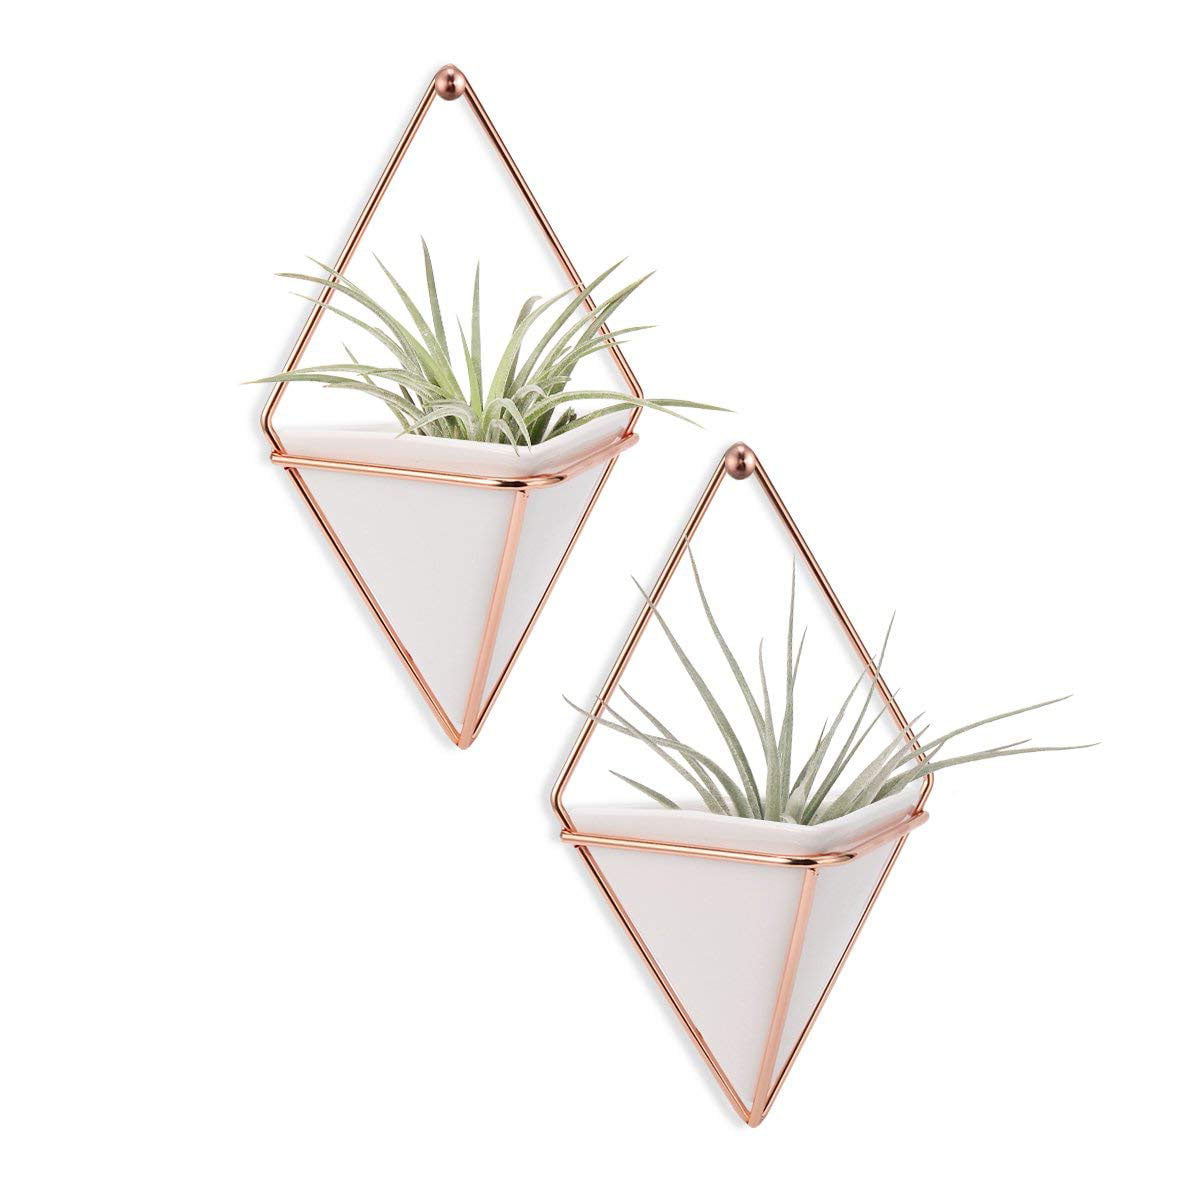 Great for Succulent Plants Air Plant Mini Cactus Faux Plants and More Hanging Planter Vase Geometric Wall Decor Ceramic Container Small Wall Planters Hanging with Metal Frame 